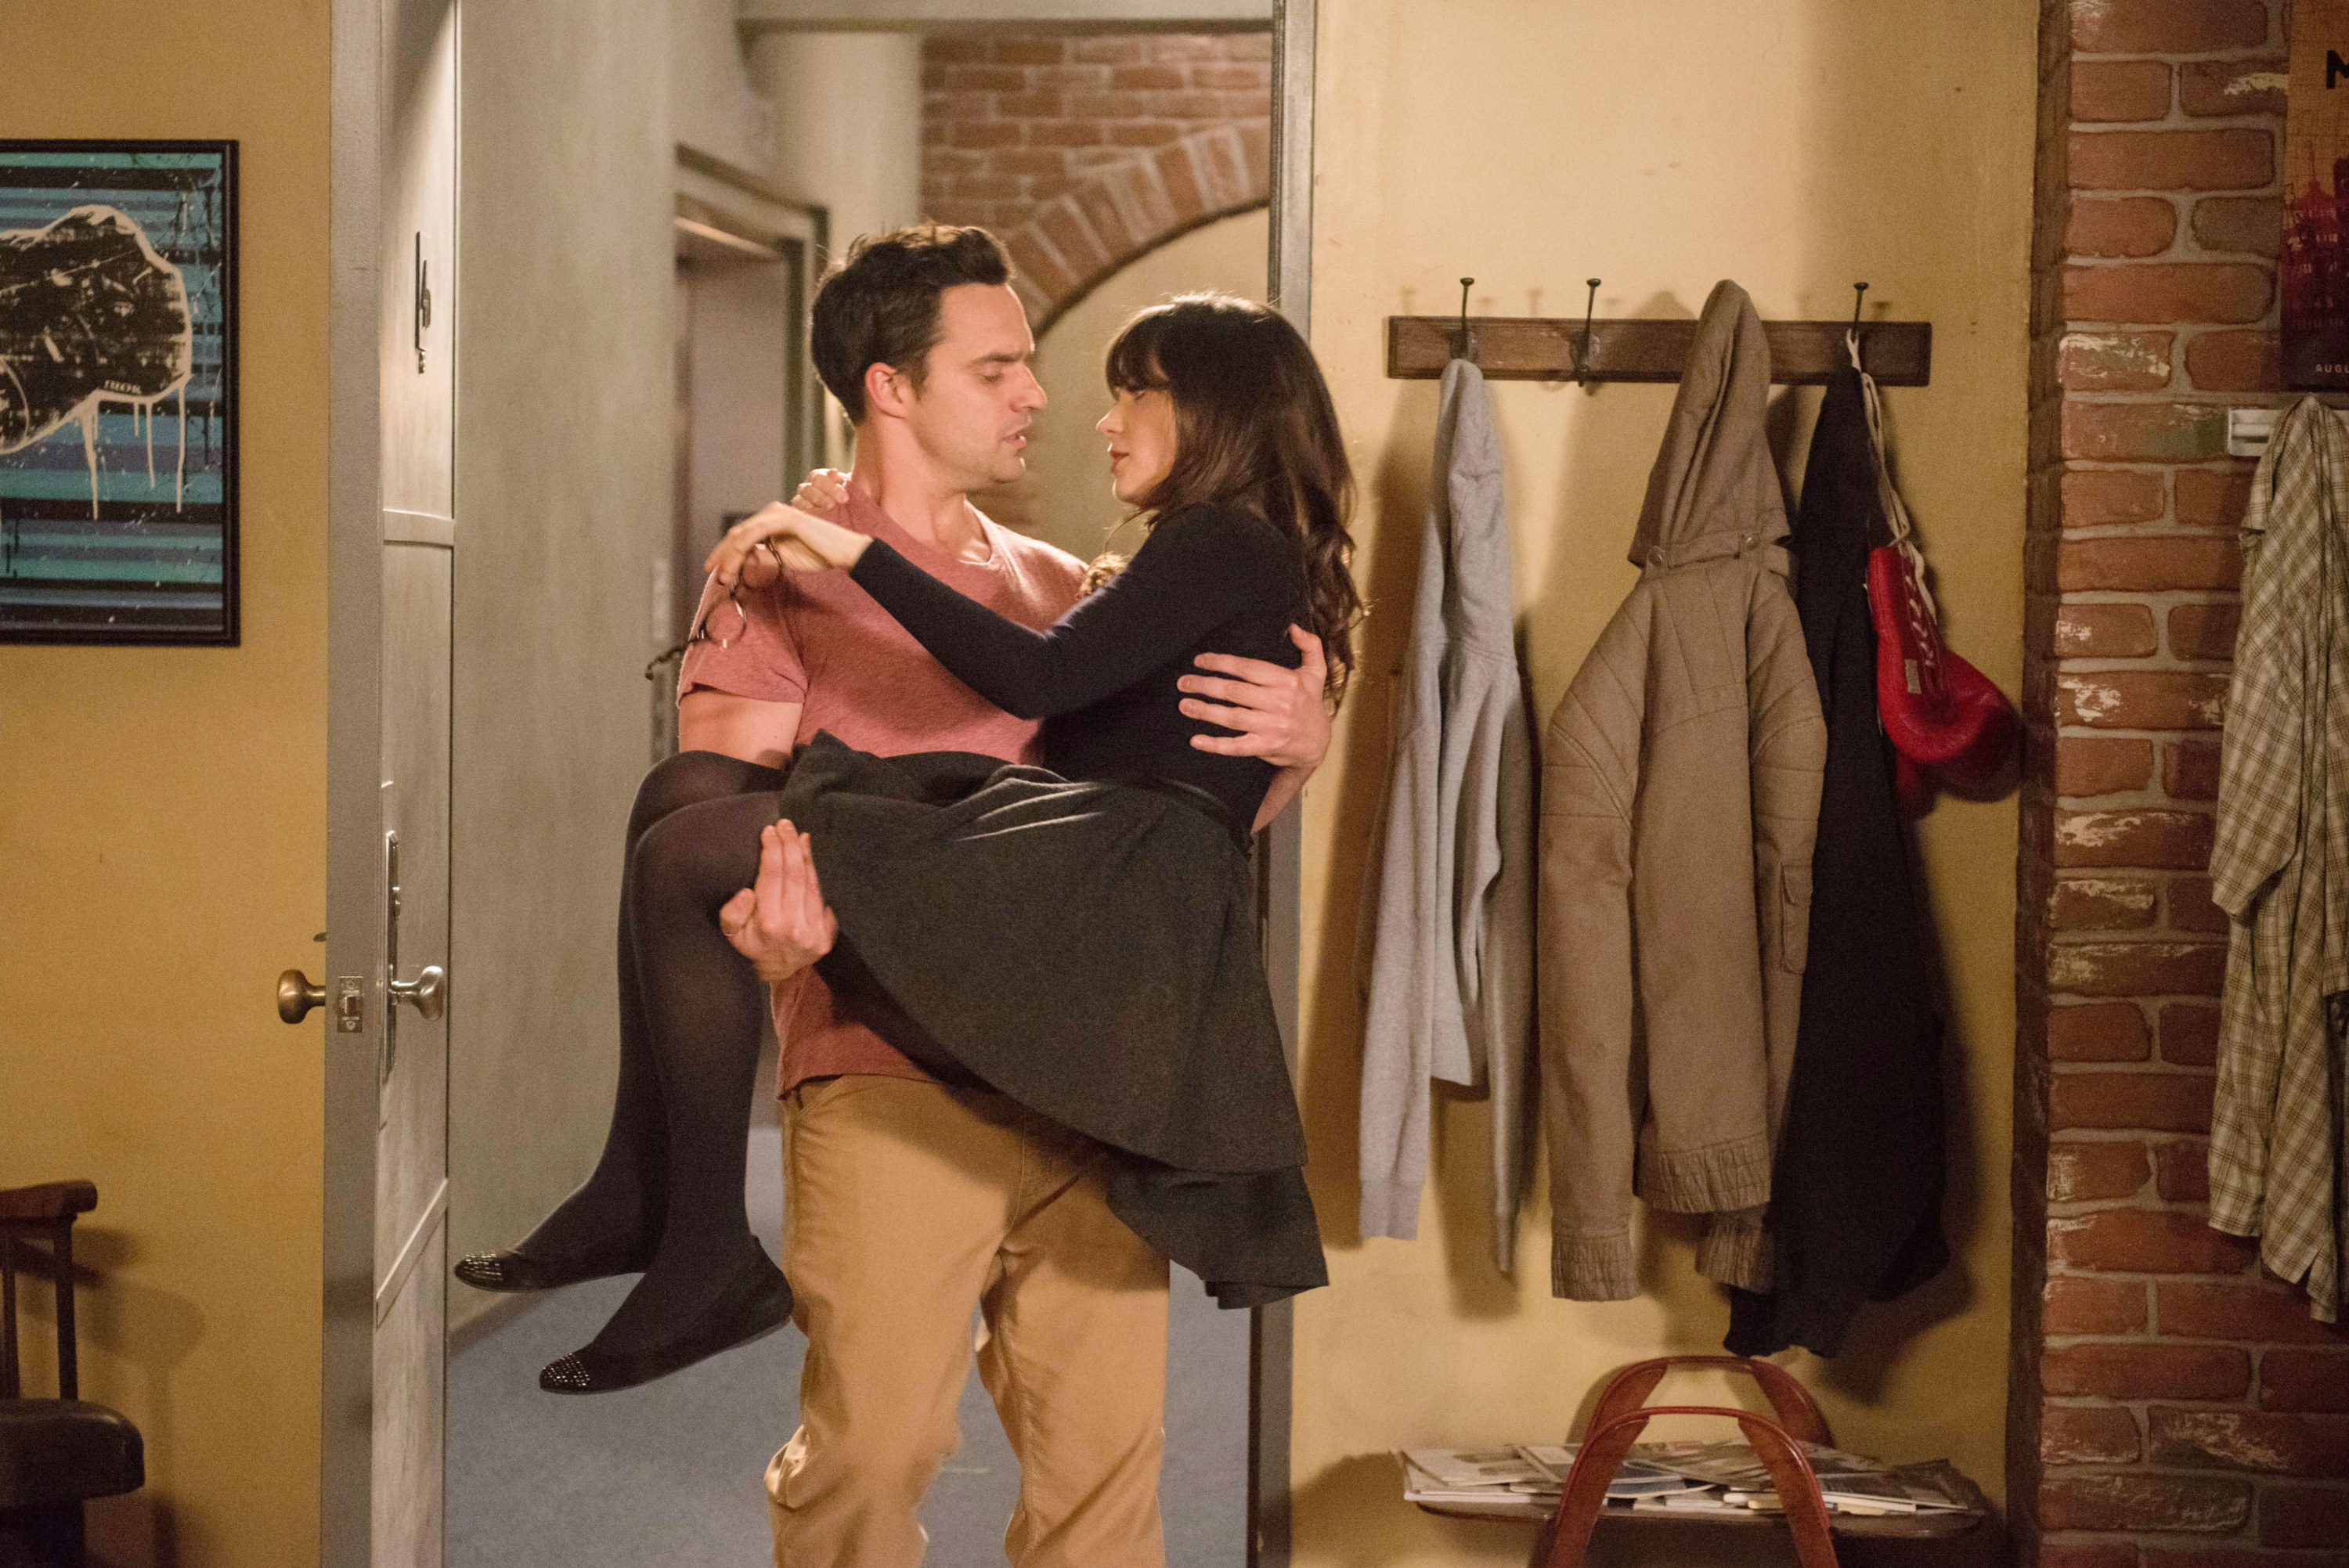 Nick carrying Jess into an apartment bridal style